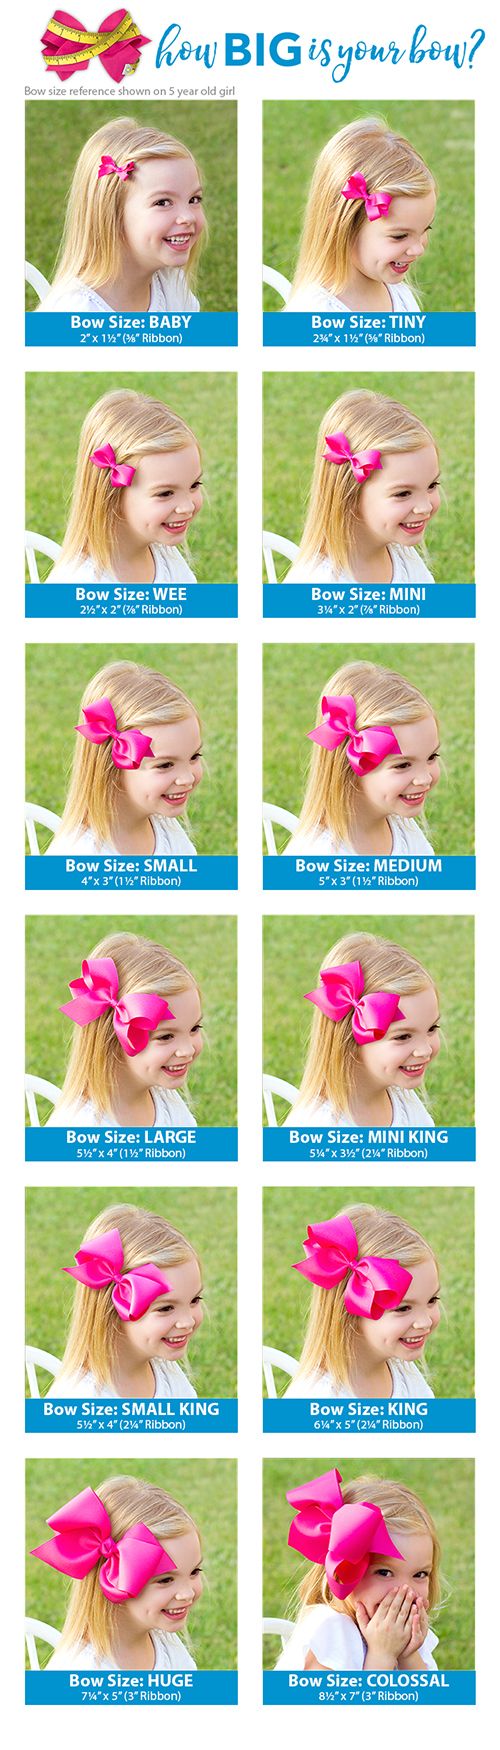 Back-to-School Letters Bow (Medium)